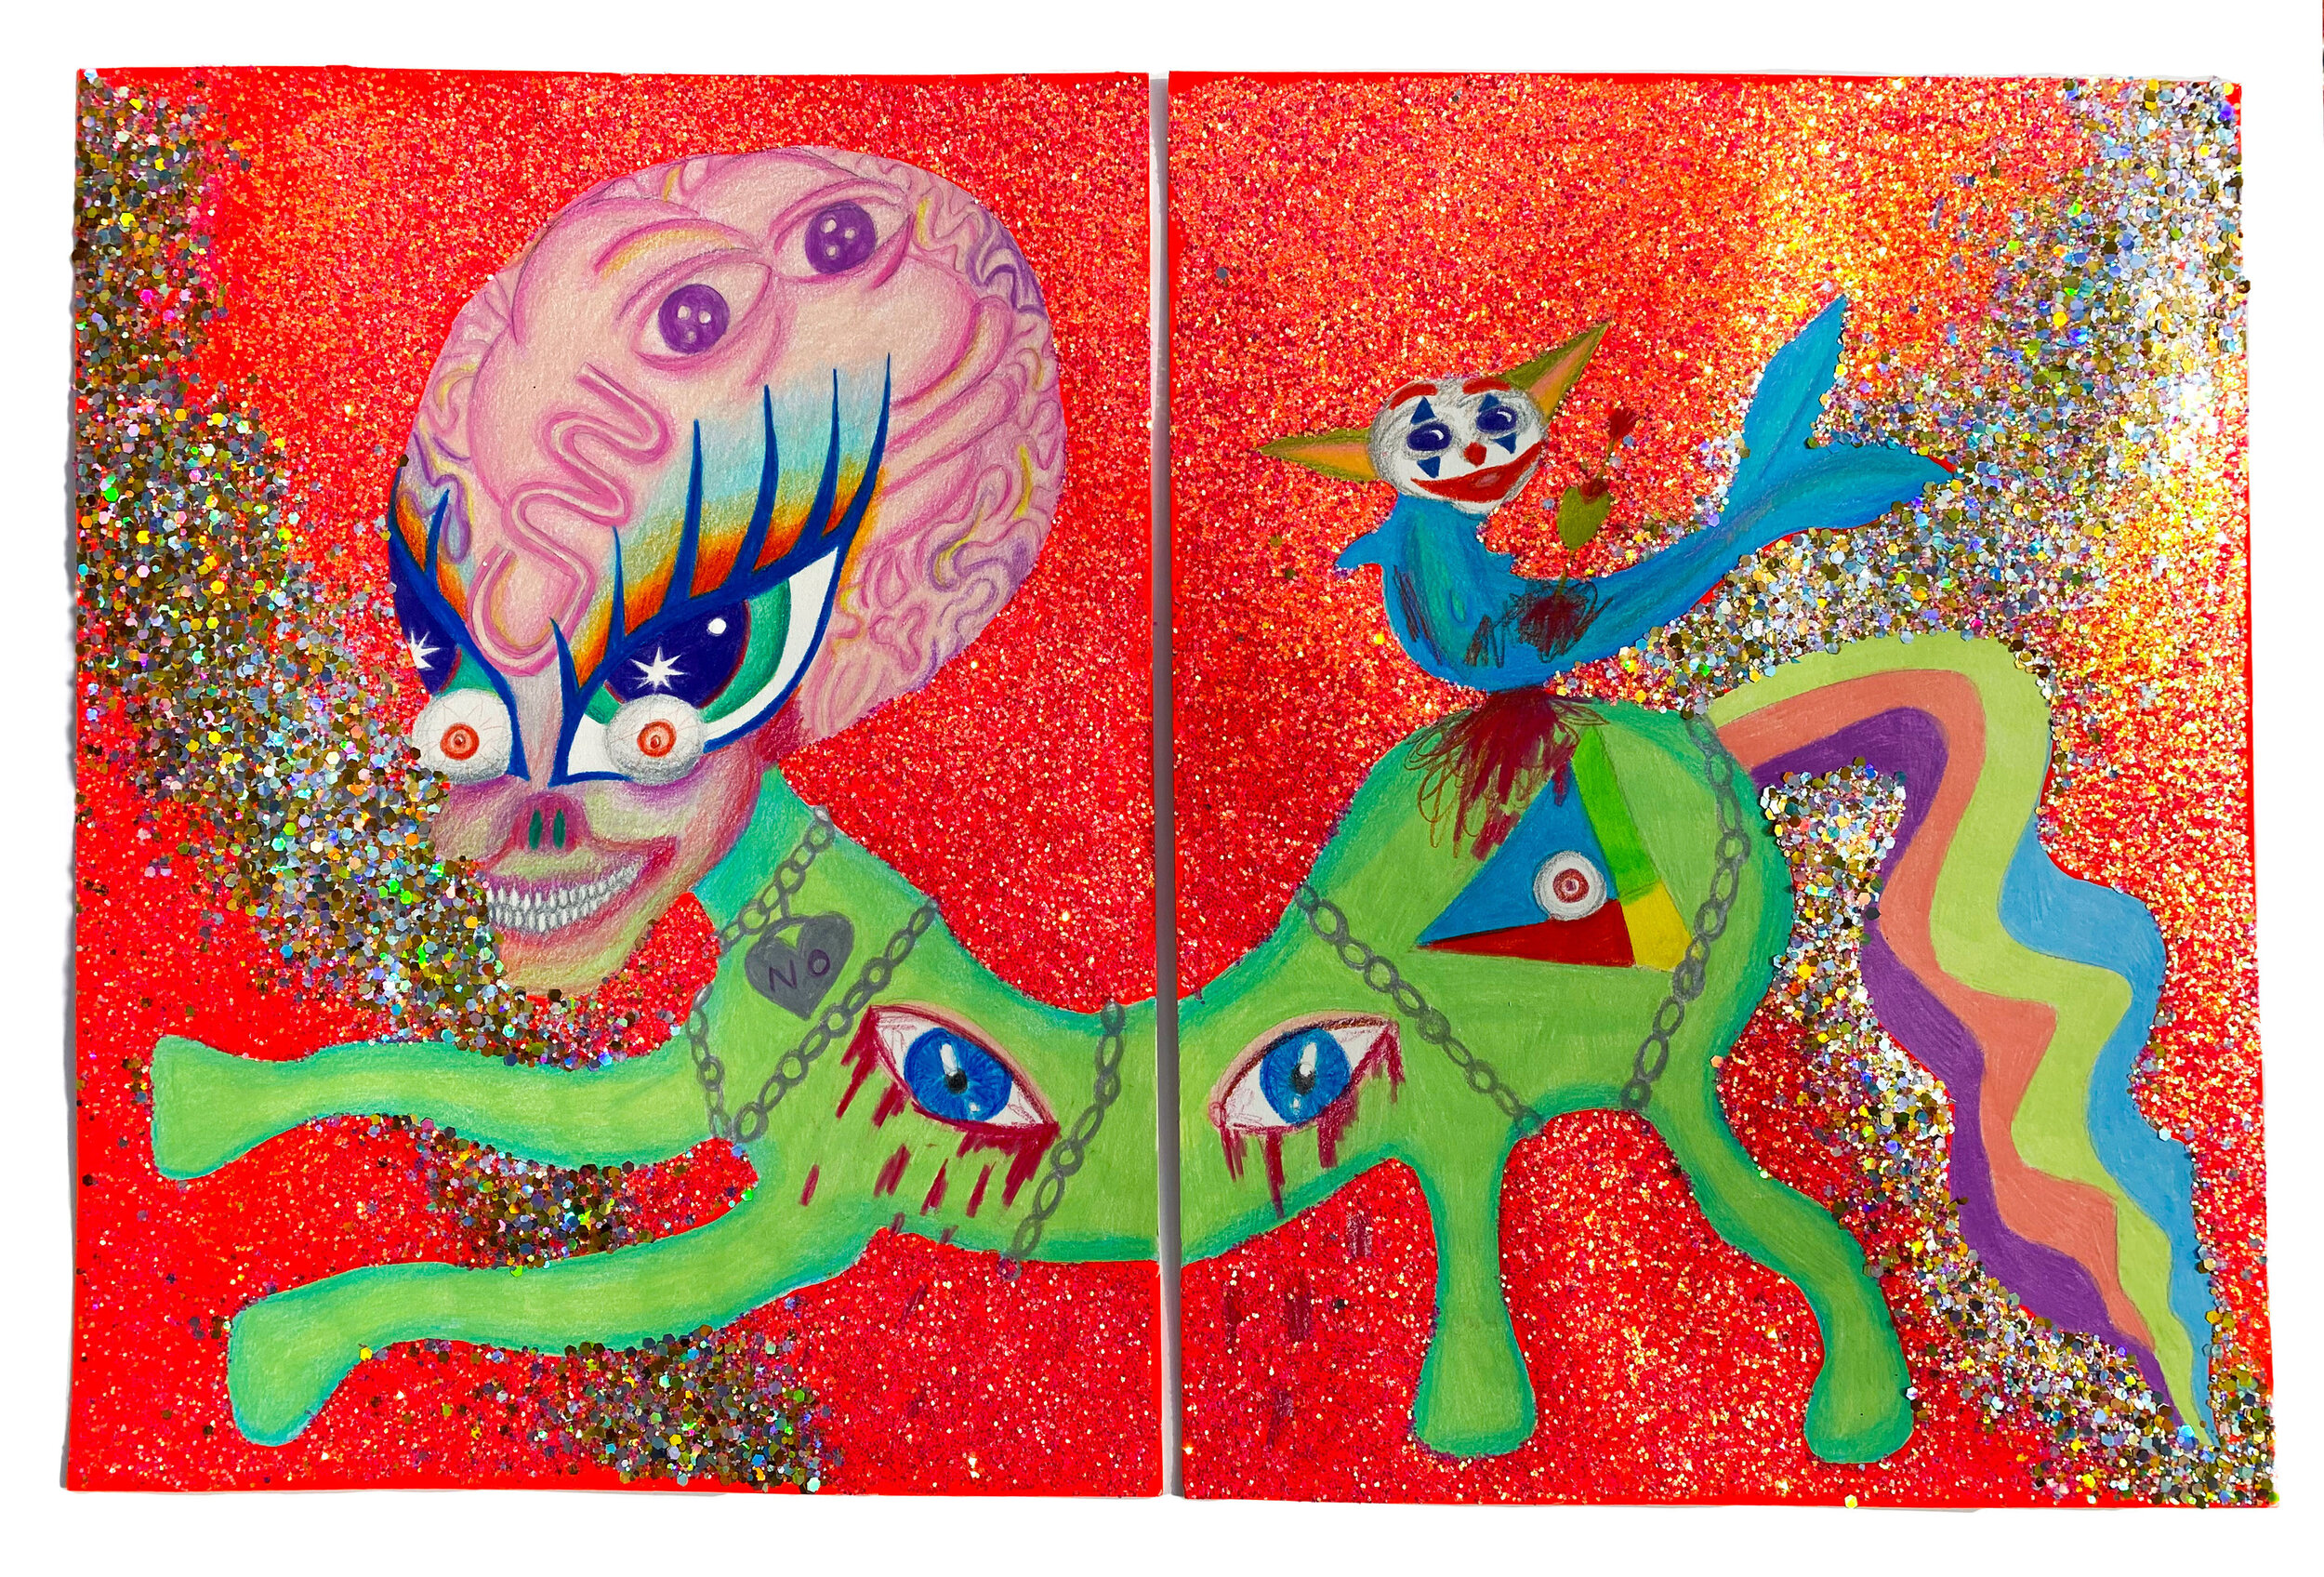   Ashamed Girls Pony #12 , 2021  Approximately 14 x 22 inches (35.56 x 55.88 cm.)  Colored pencil, acrylic paint, Elmer's glue, Modge Podge, and glitter on paper 